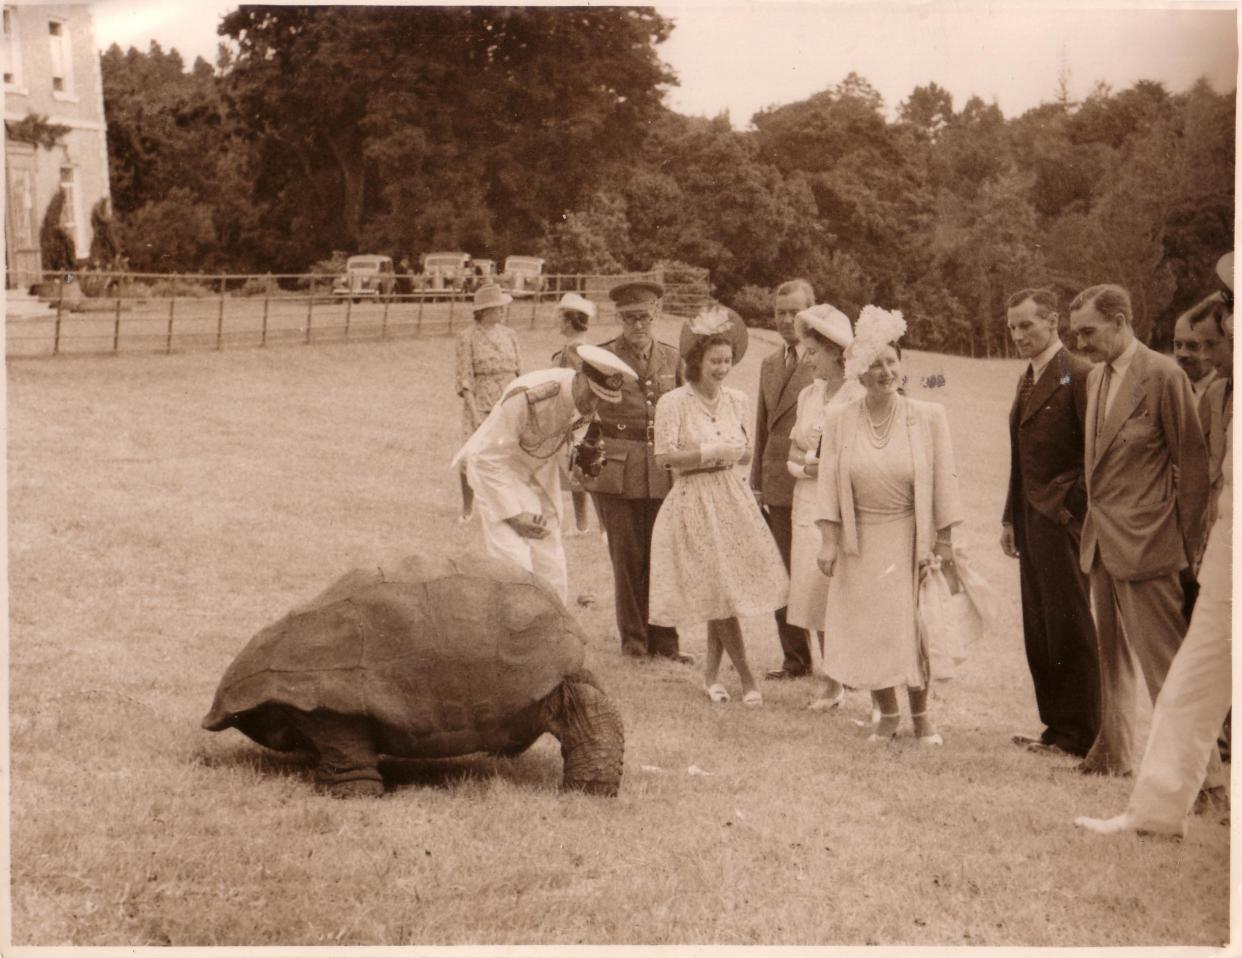 Princess Elizabeth, Princess Margaret and George VI and Queen Elizabeth with the tortoise in 1947